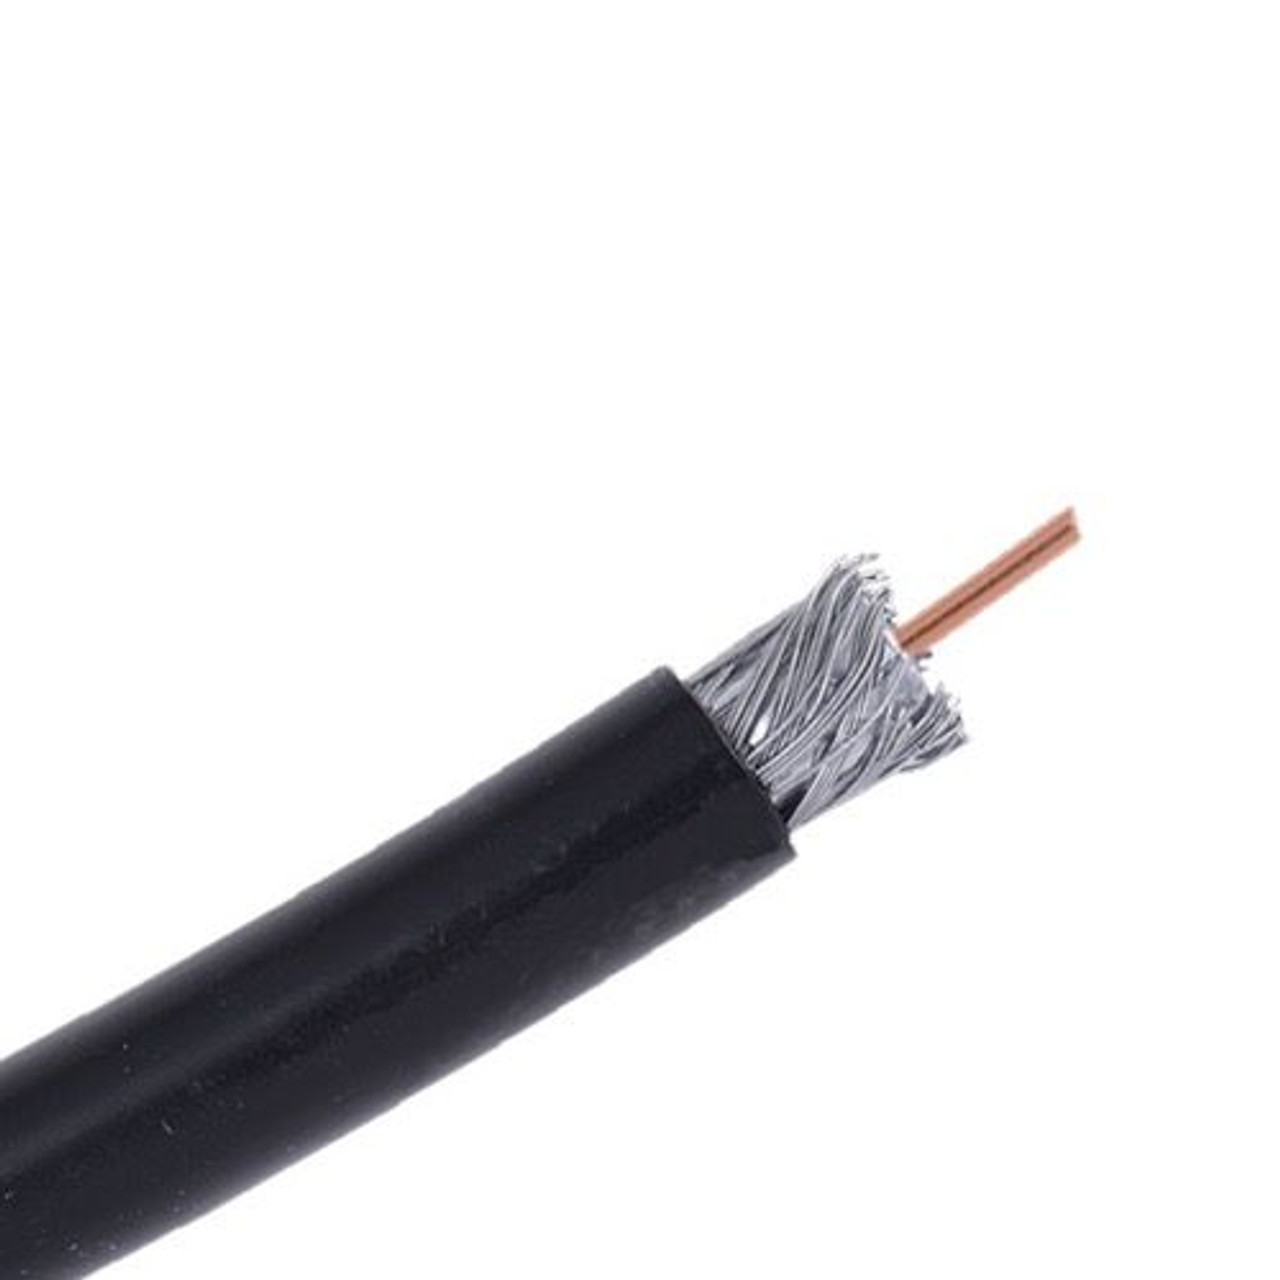 Eagle 1000' FT RG6 Coaxial Cable Black Soid Copper 18 AWG Center Solid Copper Dual Shielded Channel Master RG-6 Coaxial Cable Swept Tested RG-6 Boxed Roll